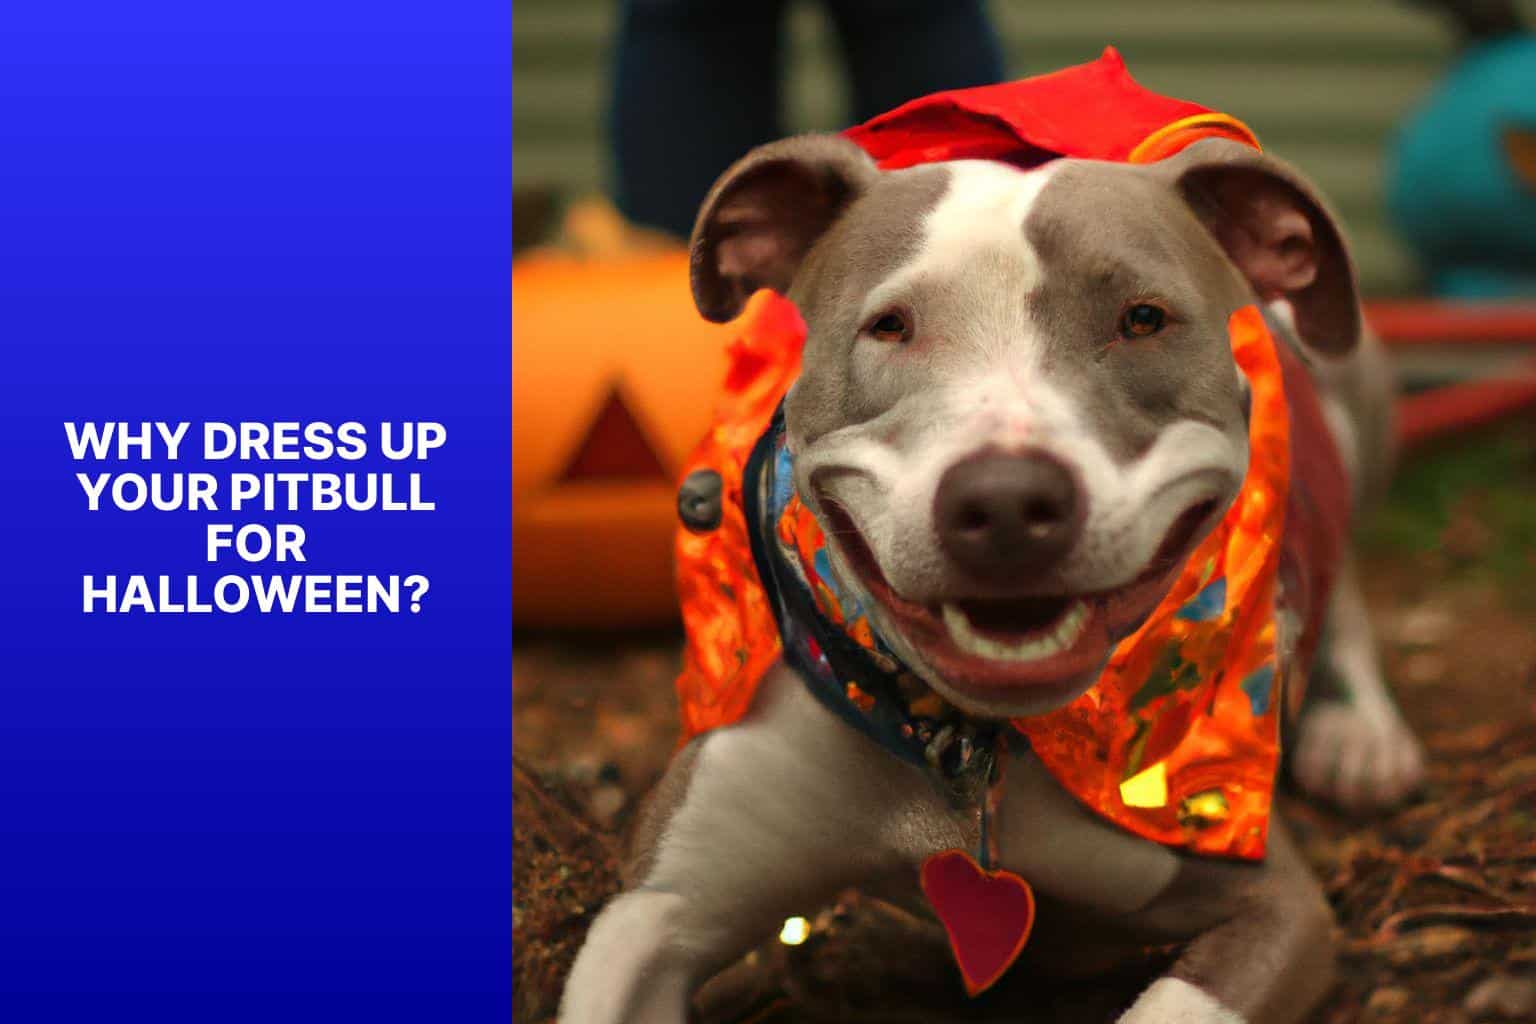 Why Dress Up Your Pitbull for Halloween? - halloween costumes for pitbulls 